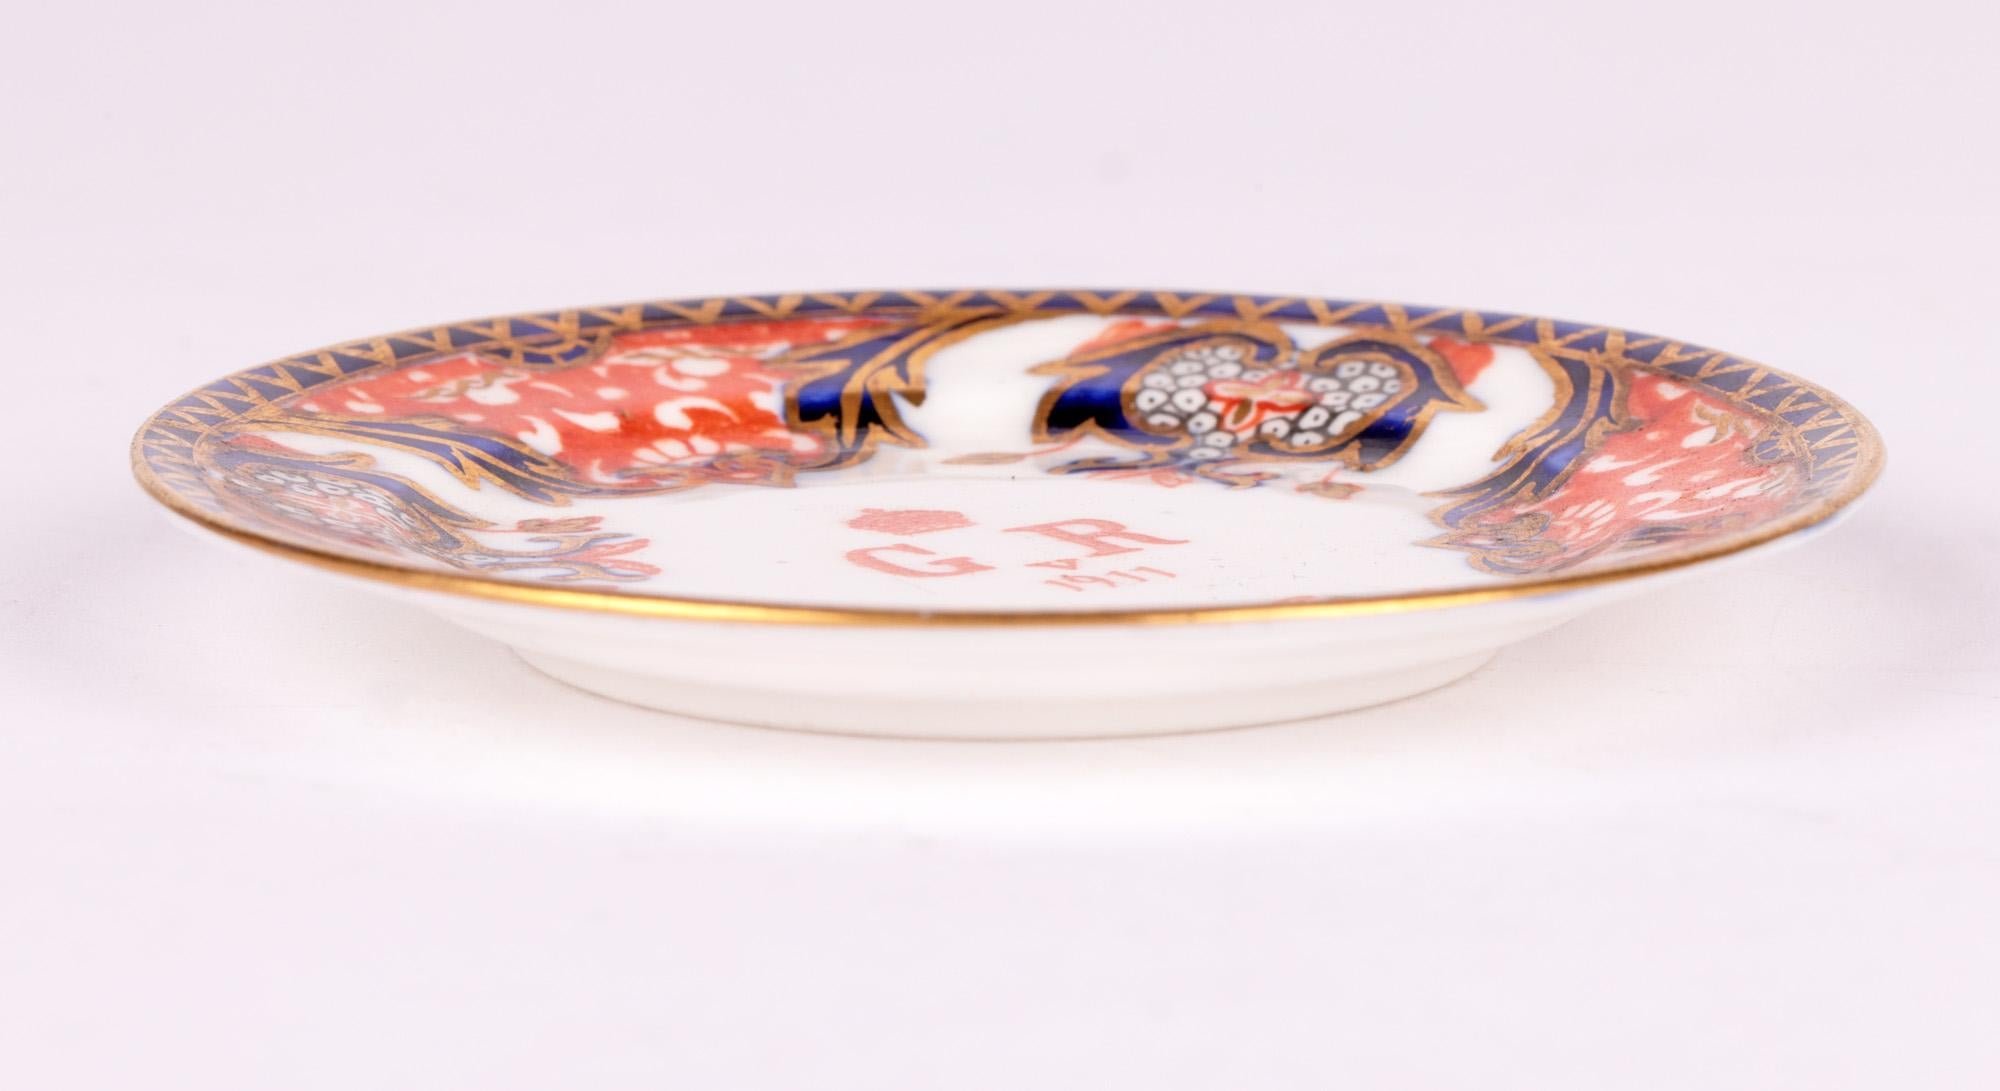 A very fine and scarce Royal Crown Derby miniature porcelain pin dish made to commemorate the Coronation of King George V dated 1911. The dish is very lightly made of small saucer shape with a raised rim and is hand decorated in the Imari pattern in